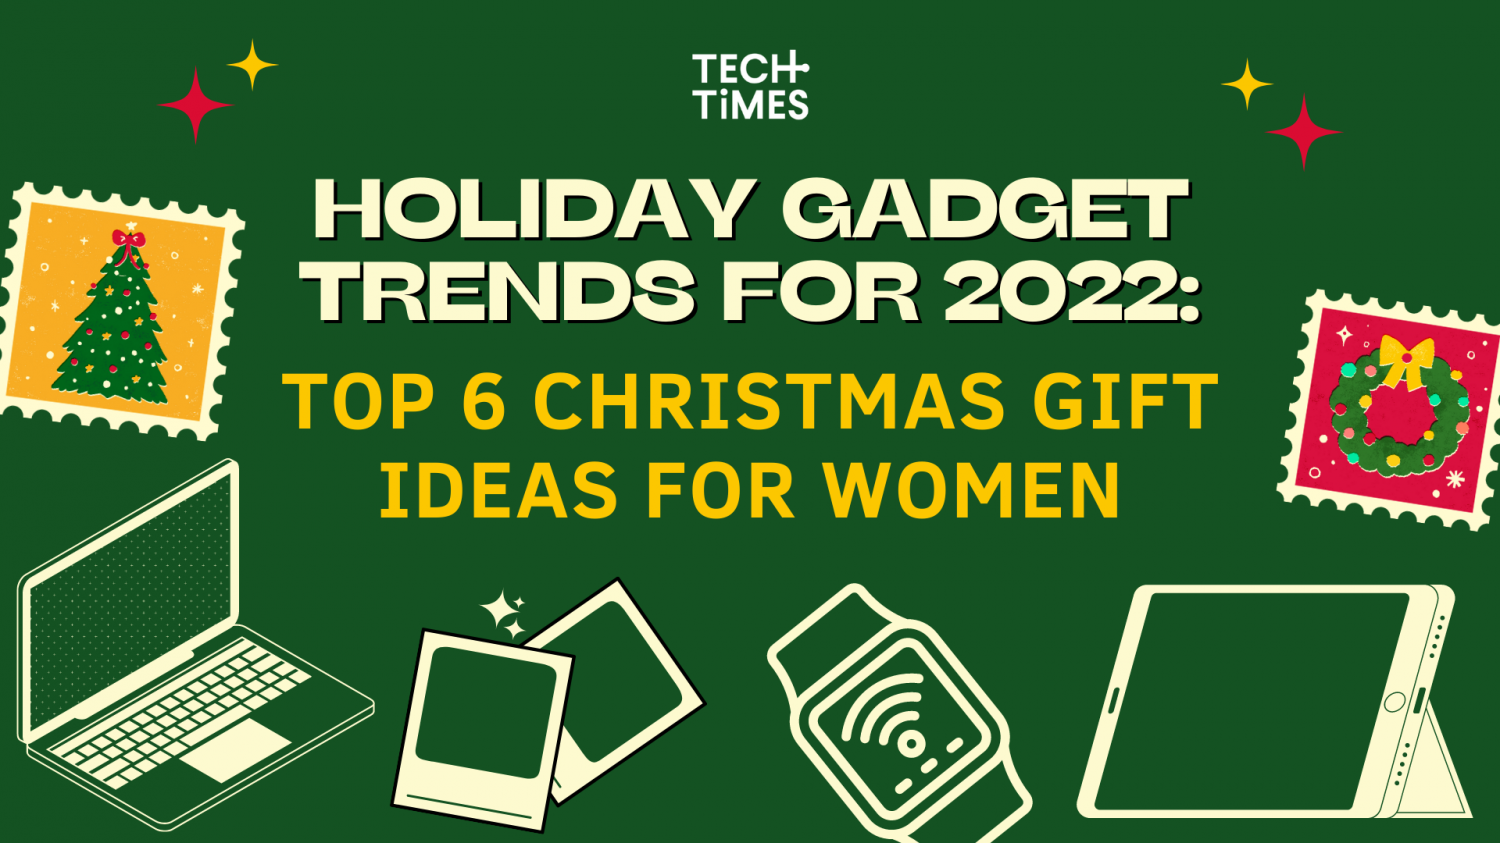 https://1734811051.rsc.cdn77.org/data/images/full/417319/holiday-gadget-trends-for-2022-top-6-christmas-gift-ideas-for-women.png